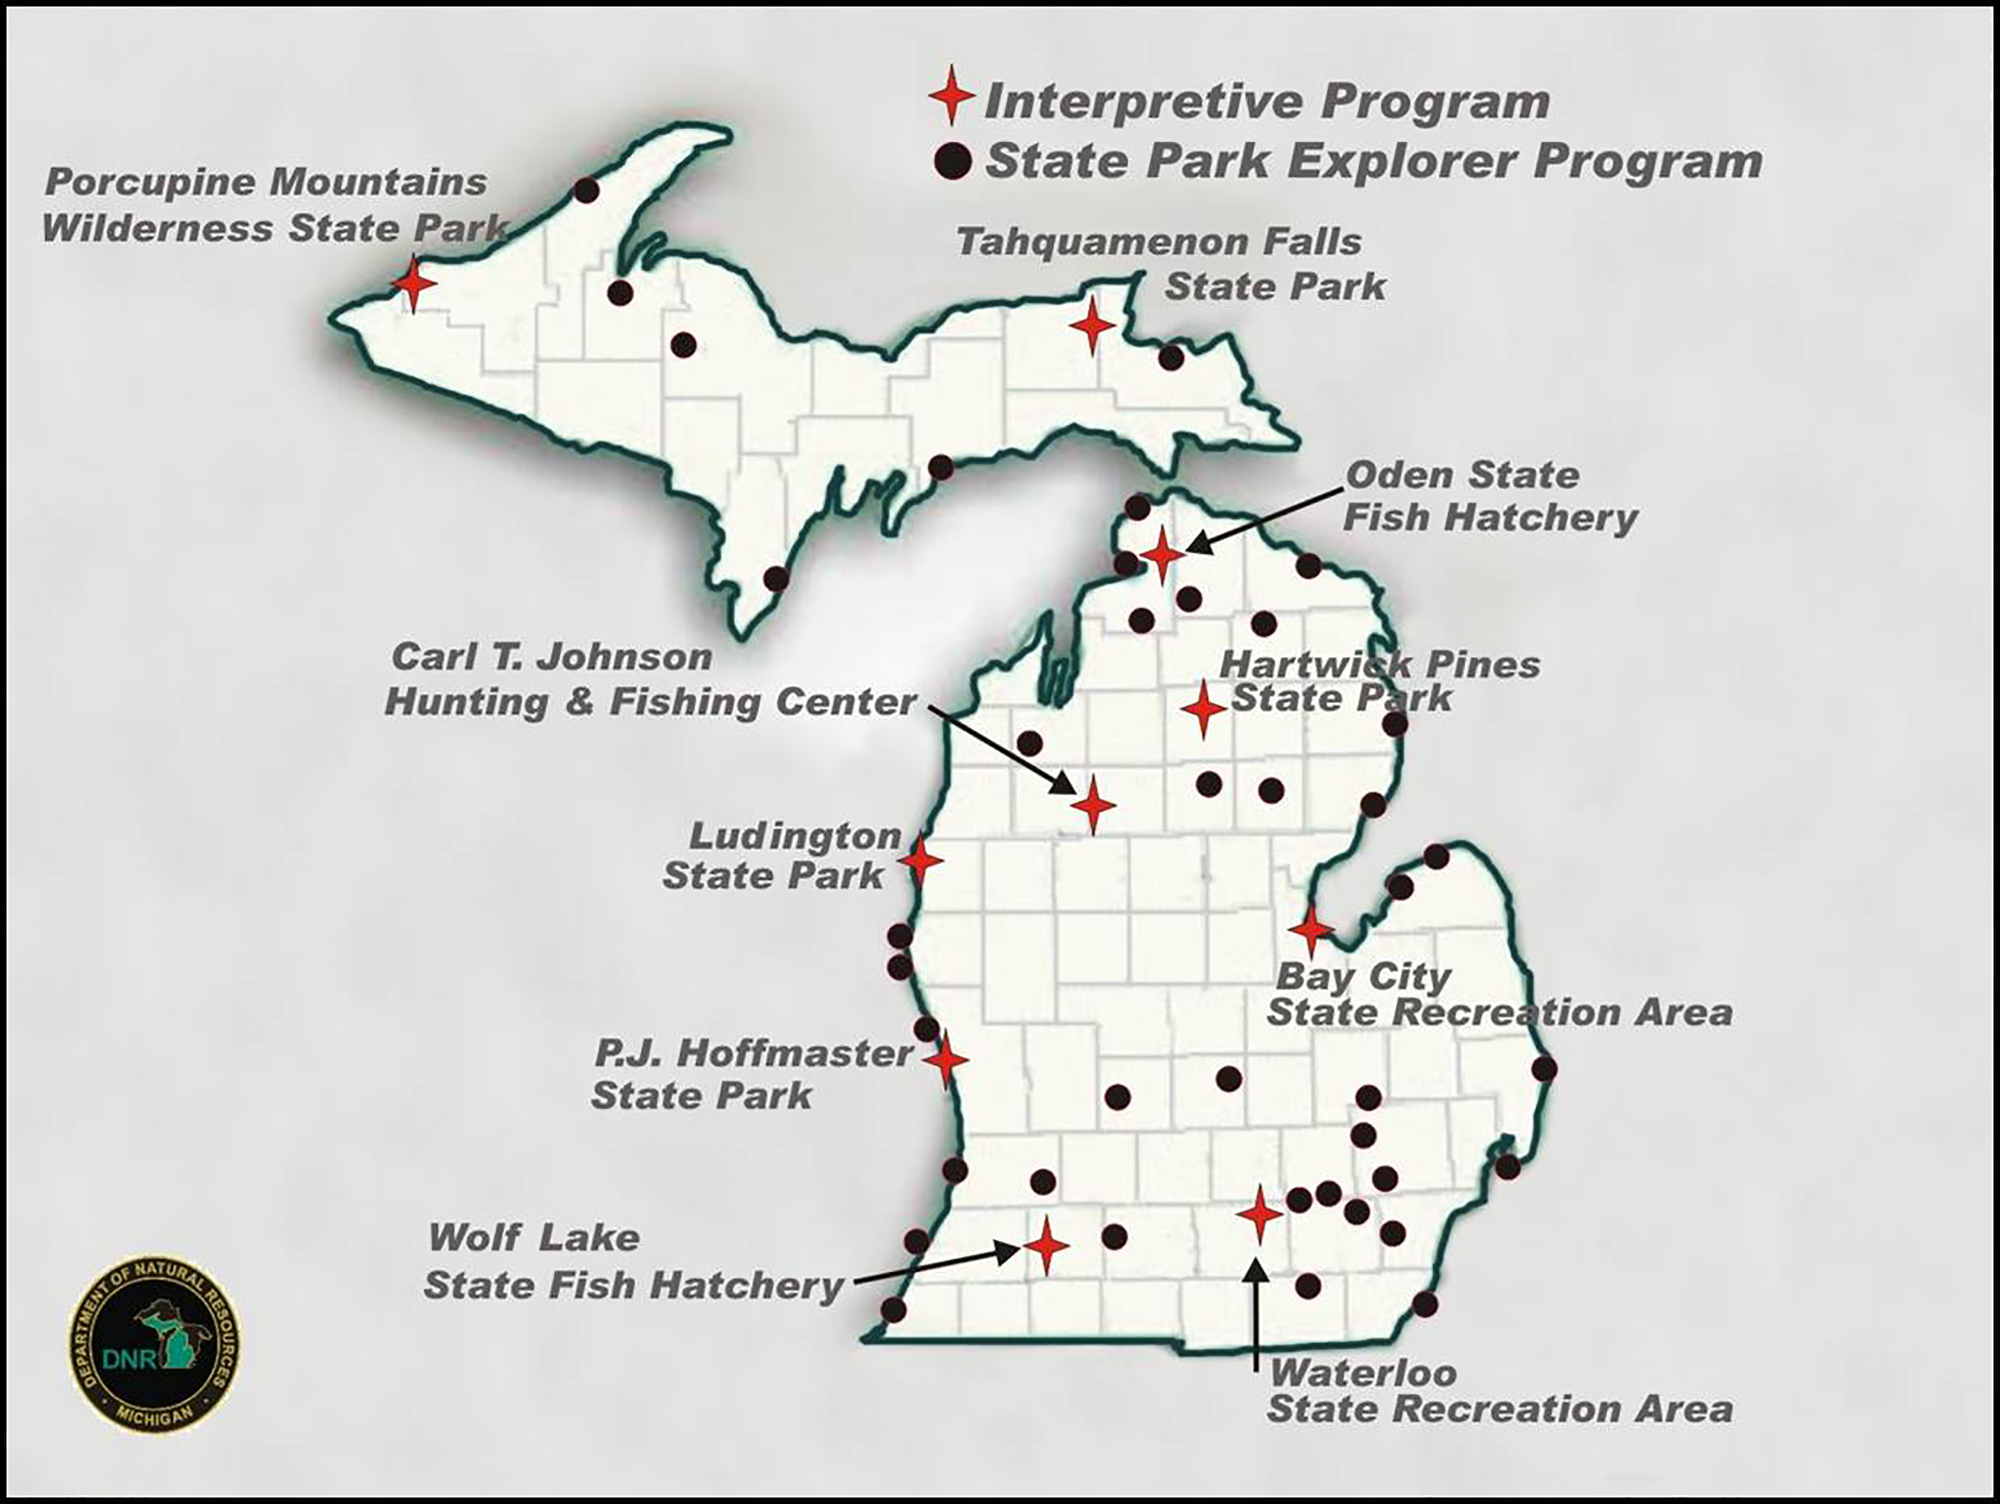 A map graphic shows the locations of state park explorer programs and interpretive programs in Michigan.